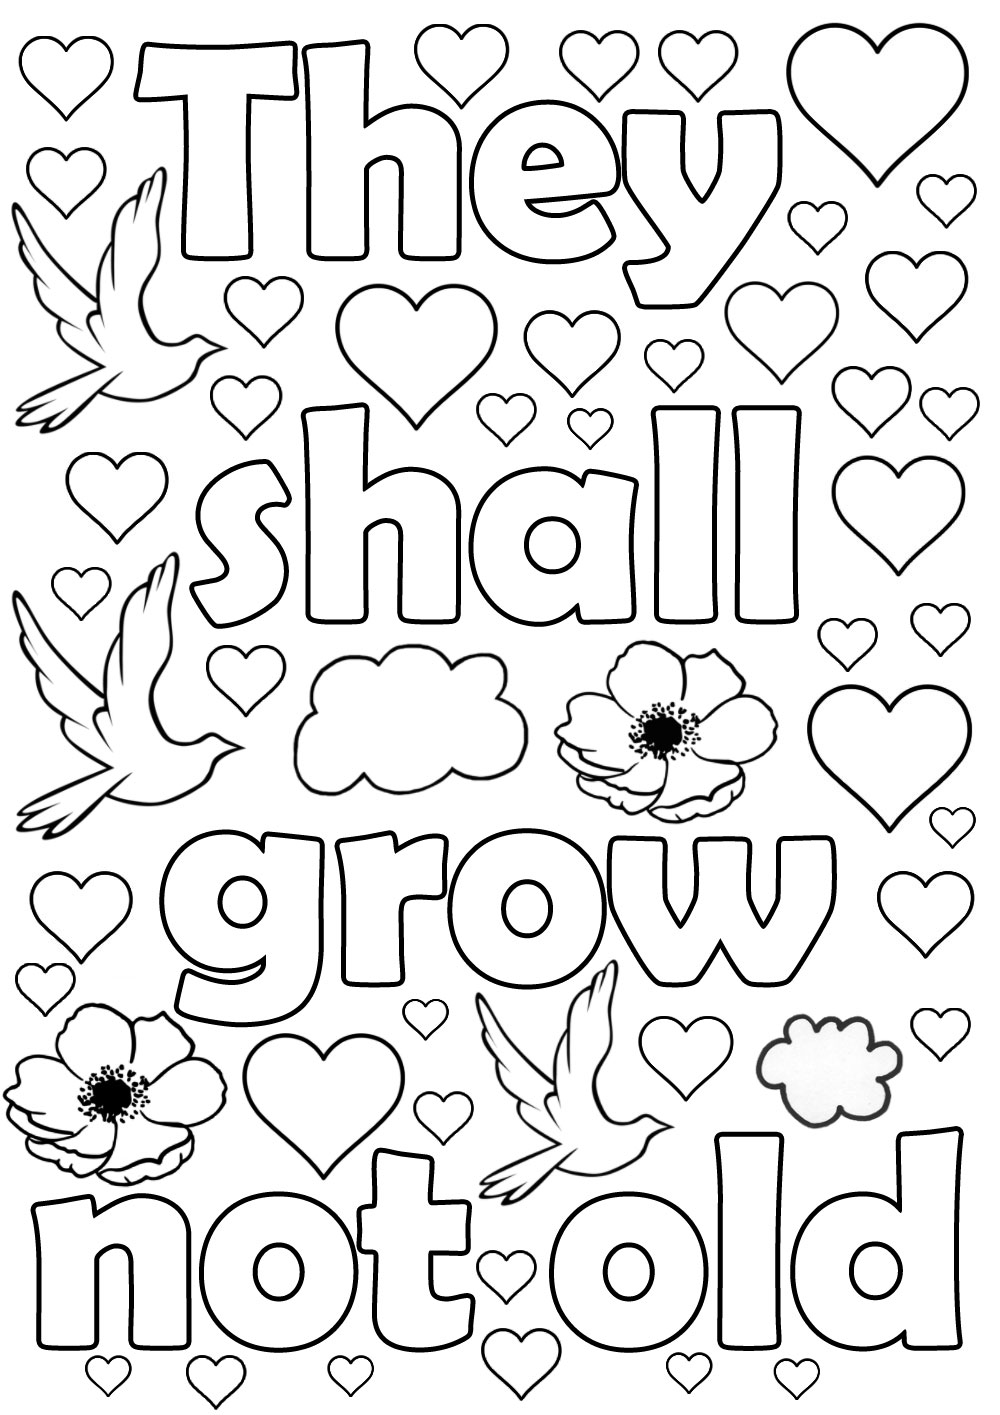 Printable colouring for Remembrance Sunday - They shall grow not old